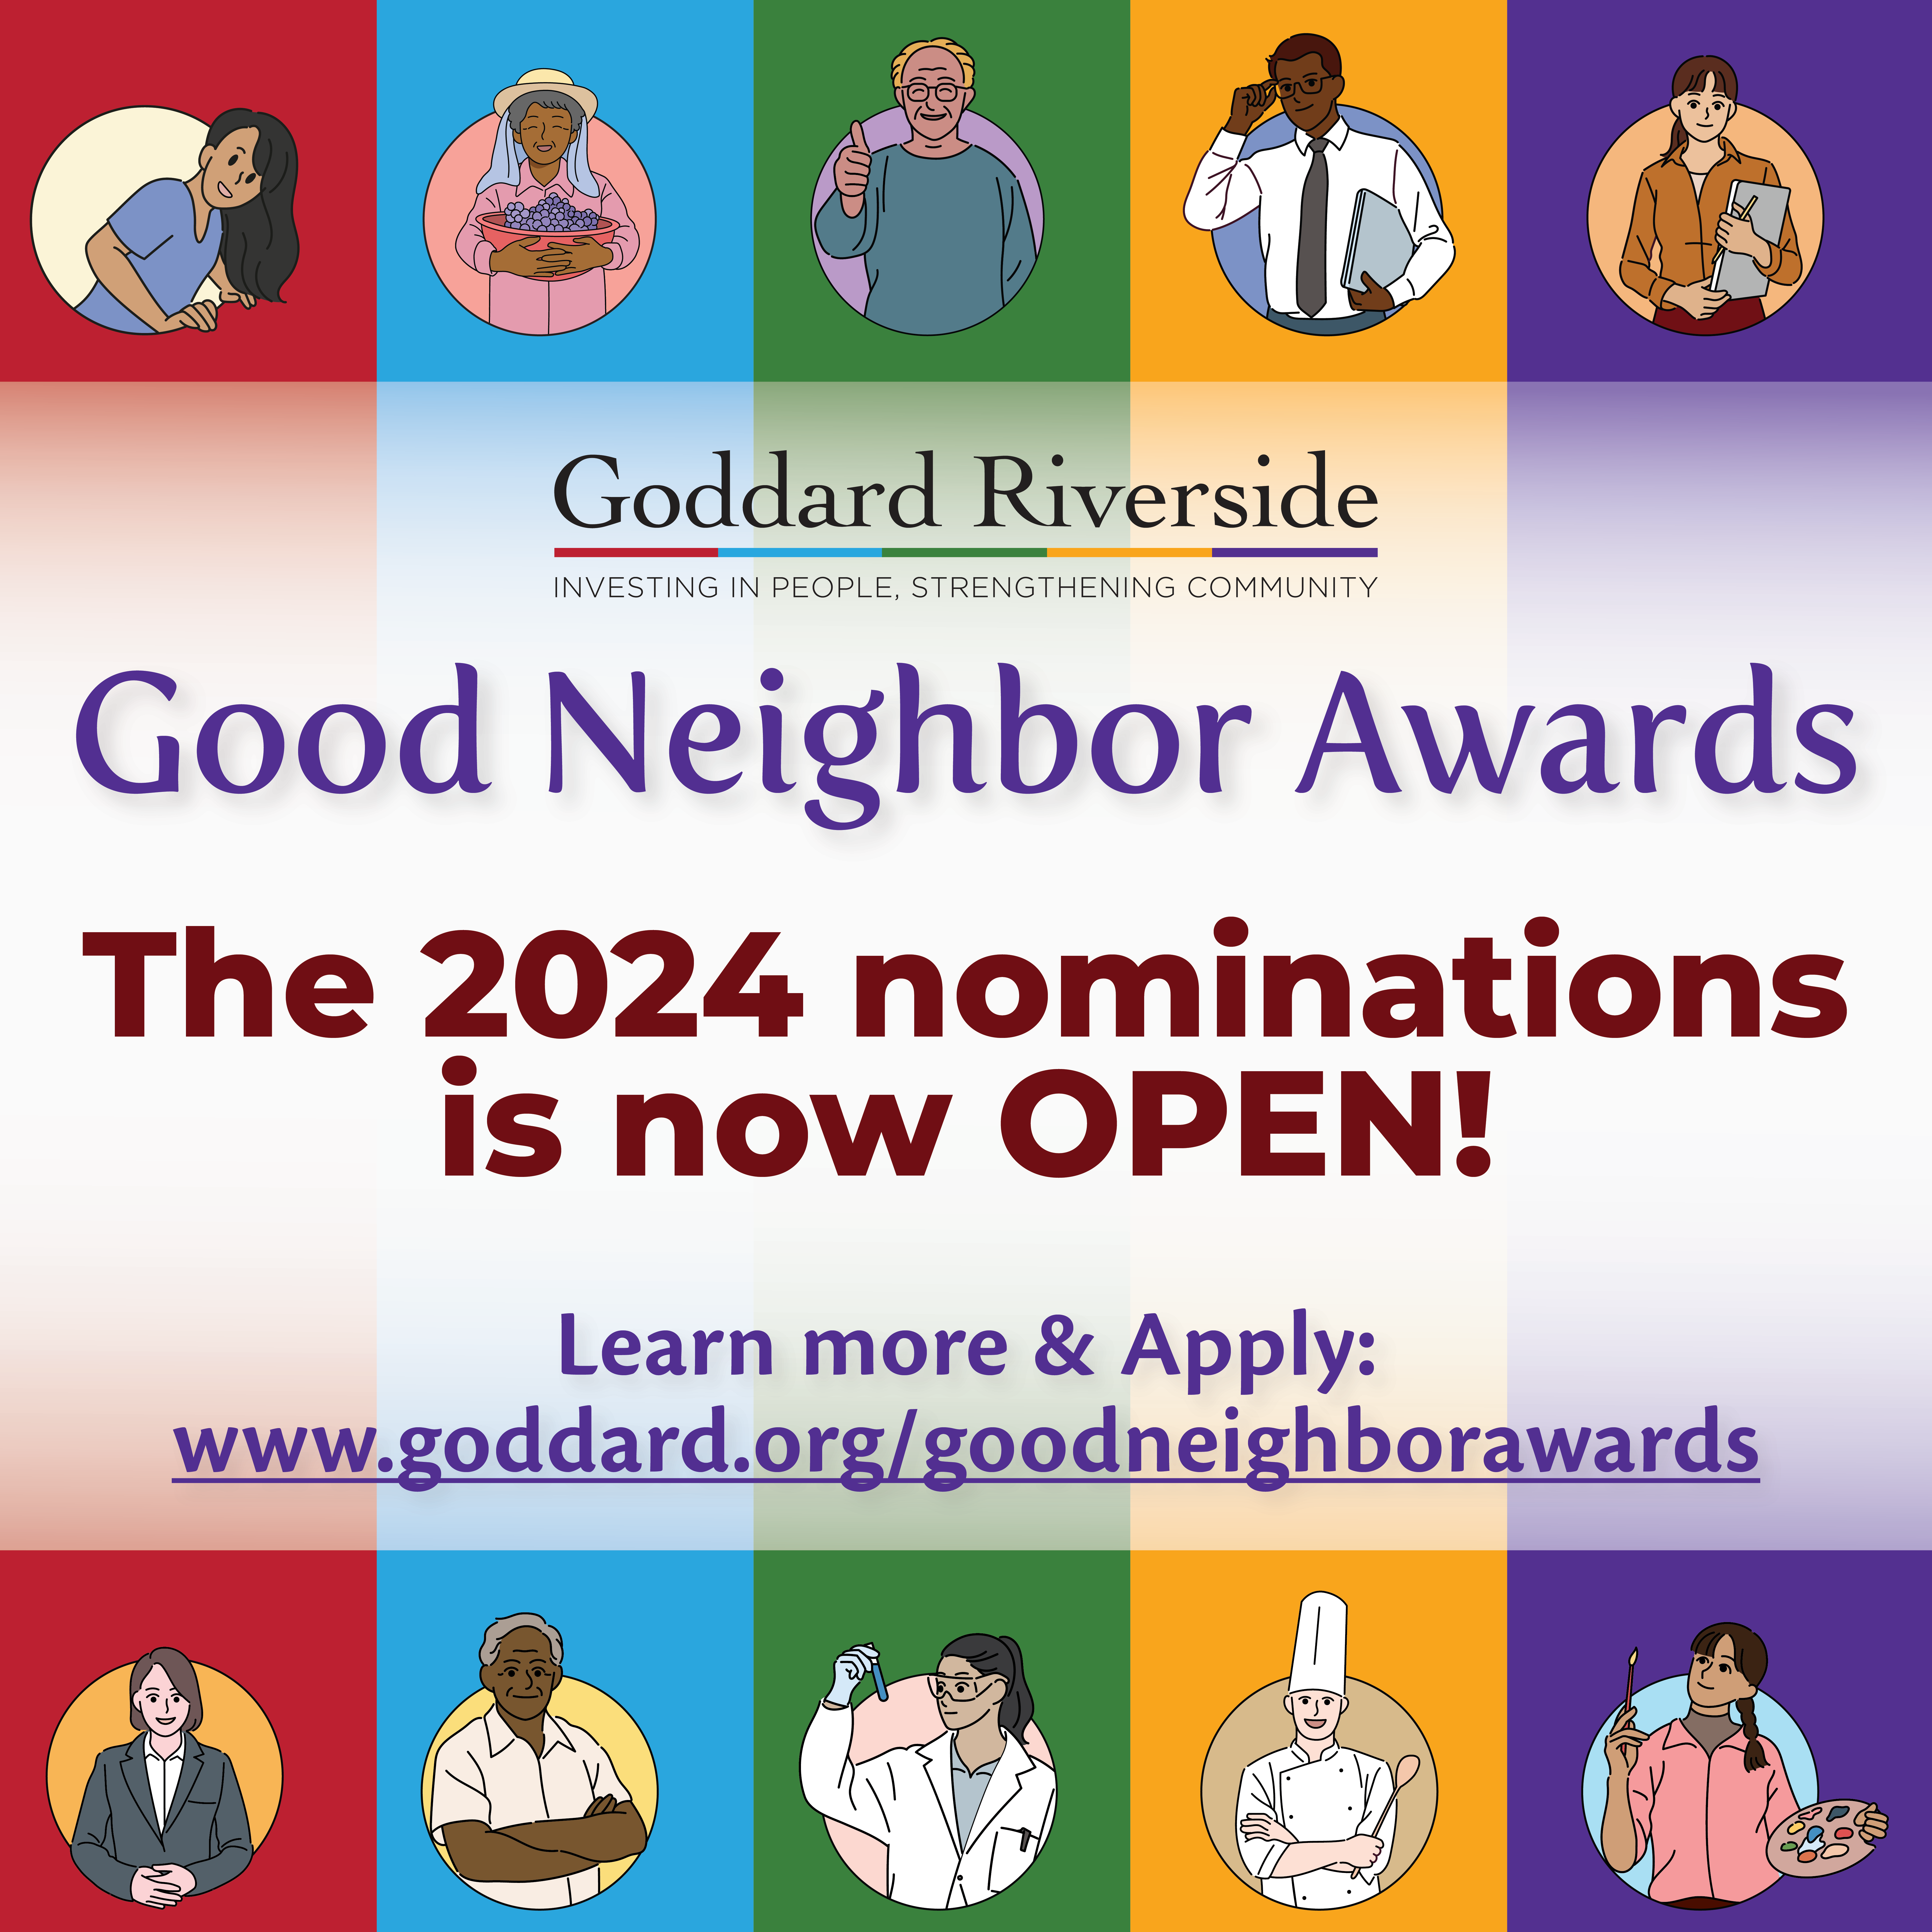 Good Neighbor Awards 2024 nominations is now open. Learn more and apply at www.goddard.org/neighborawards